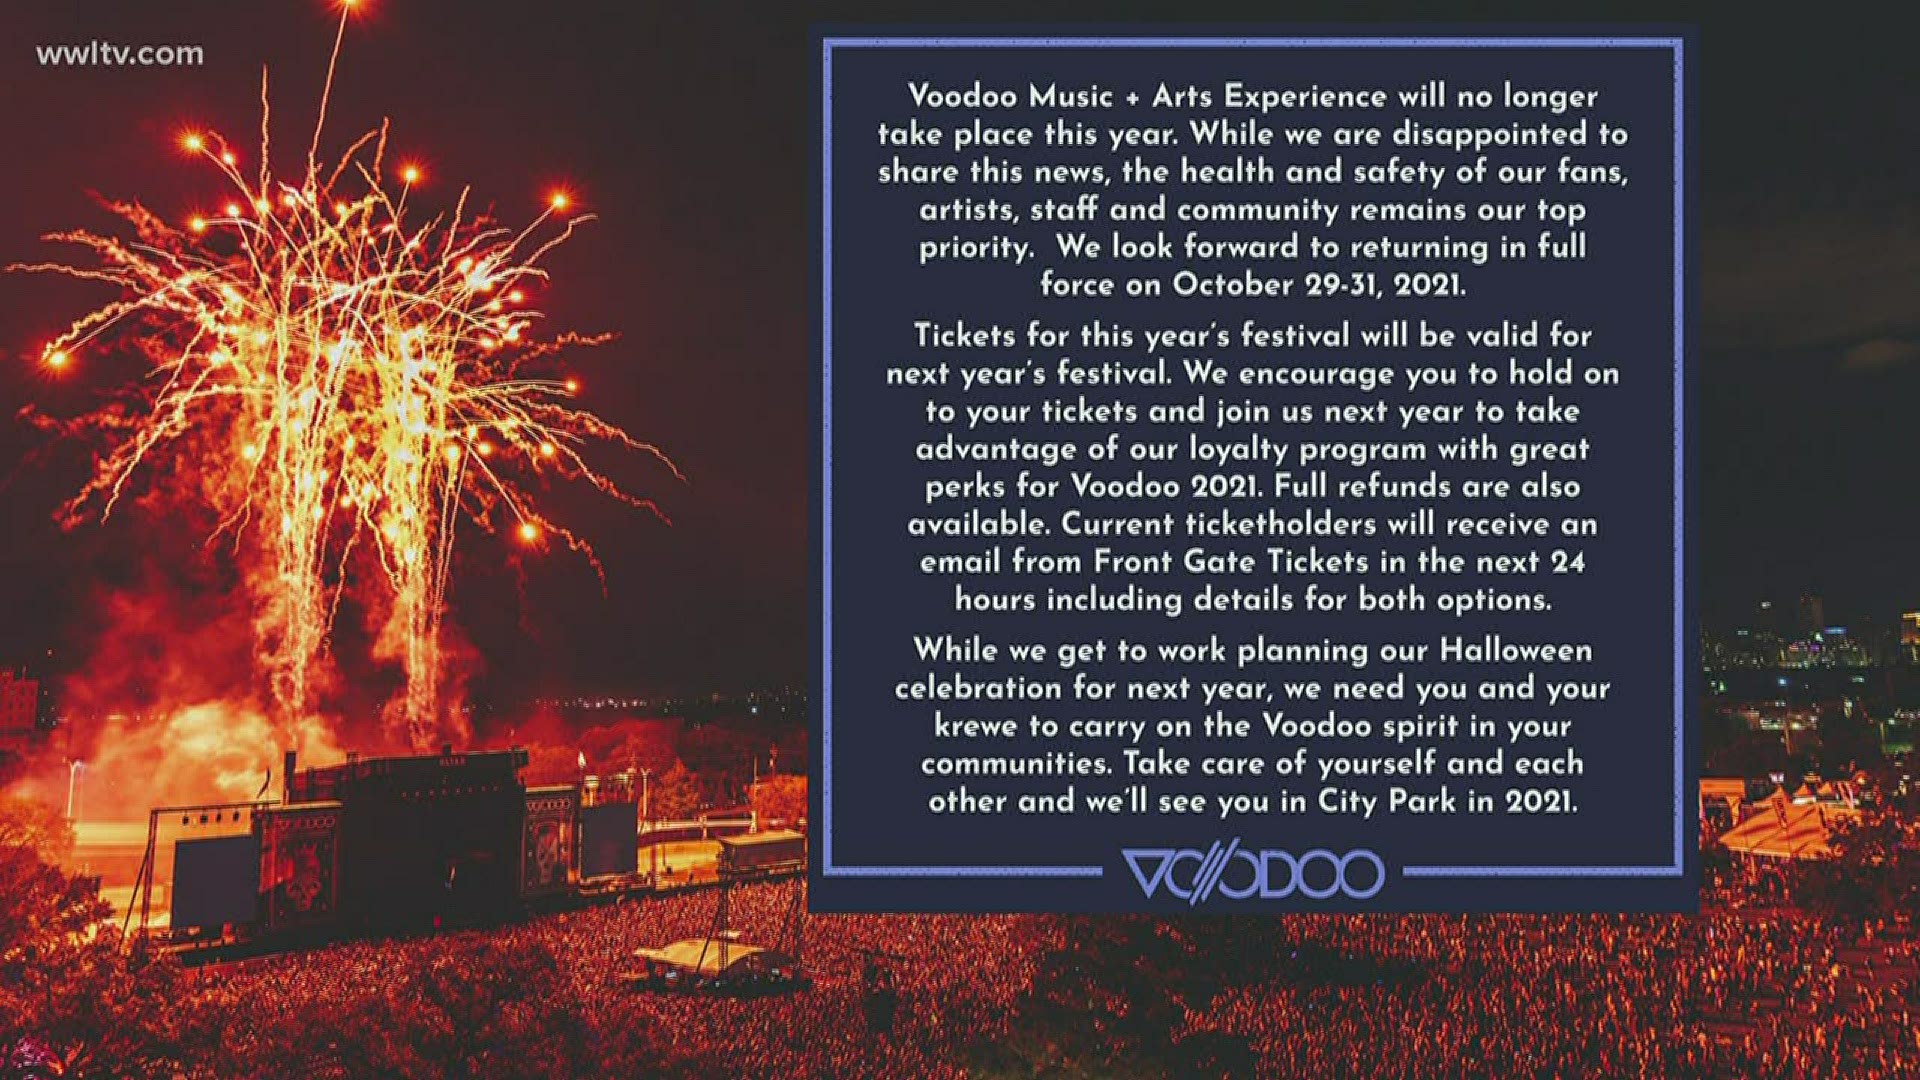 The Voodoo Music + Arts Experience has cancelled its 2020 festival, the latest major event in New Orleans to do so because of the coronavirus pandemic.